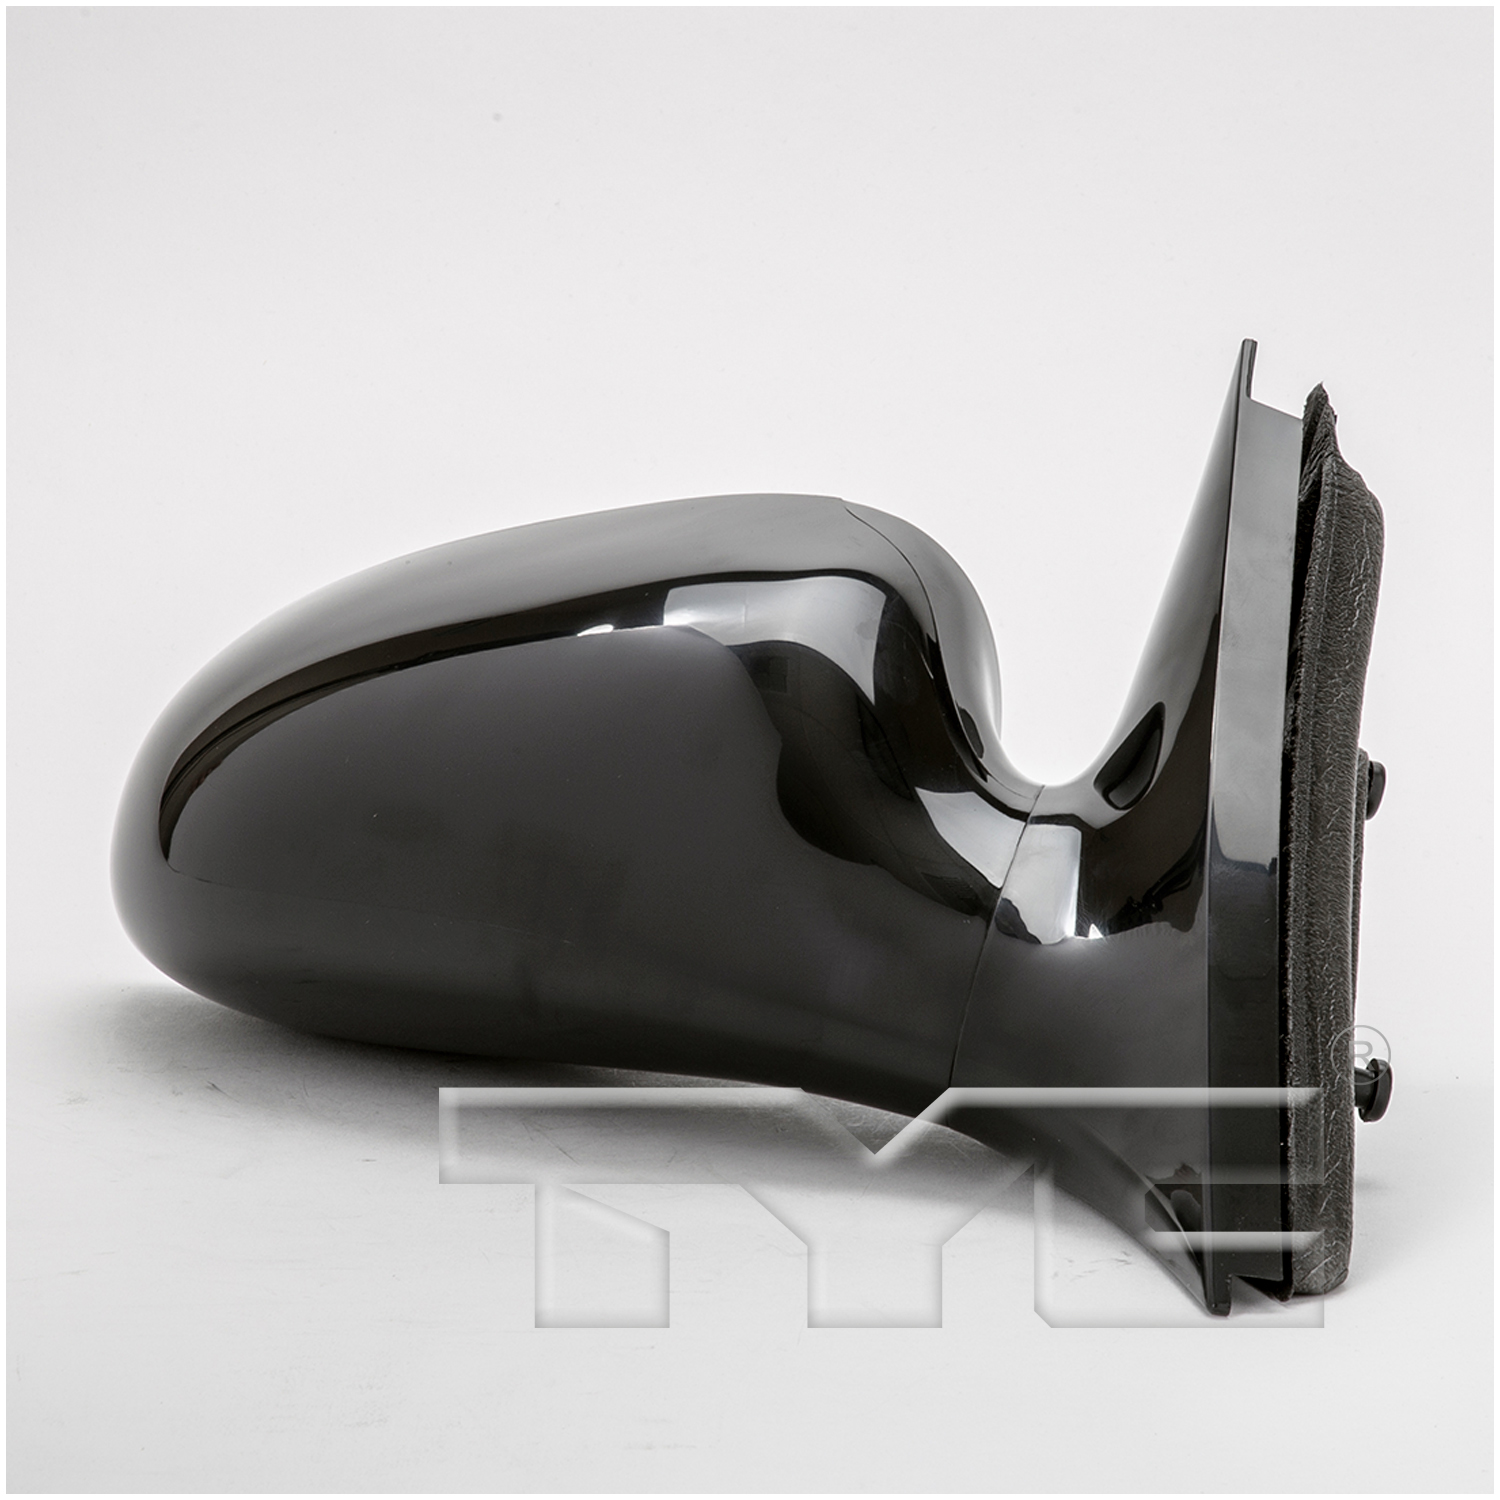 Aftermarket MIRRORS for BUICK - LACROSSE, LACROSSE,05-08,RT Mirror outside rear view